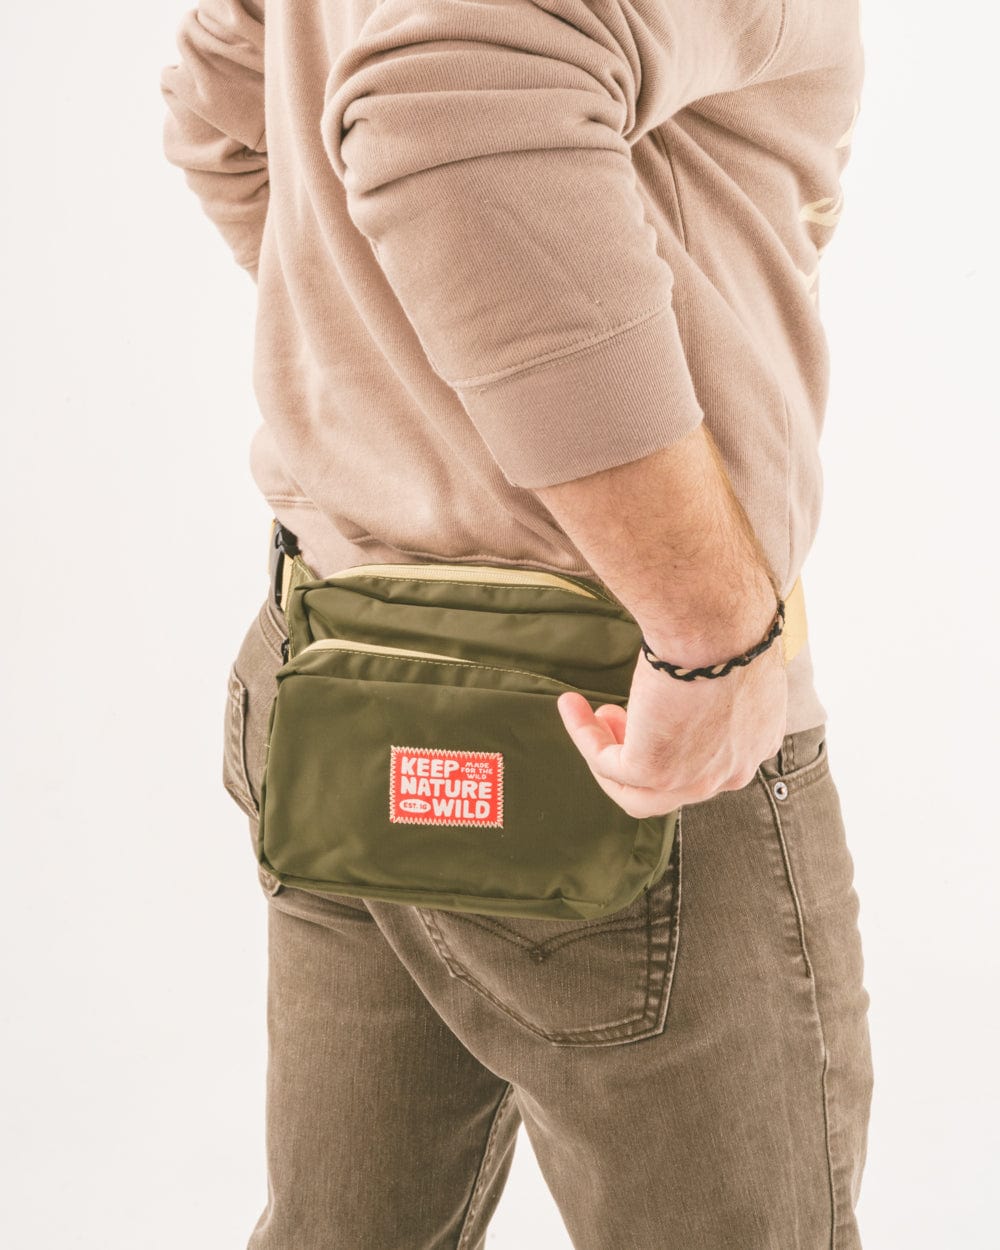 Keep Nature Wild adventure fanny pack in olive green with a stitched on Keep Nature Wild logo patch on the front.